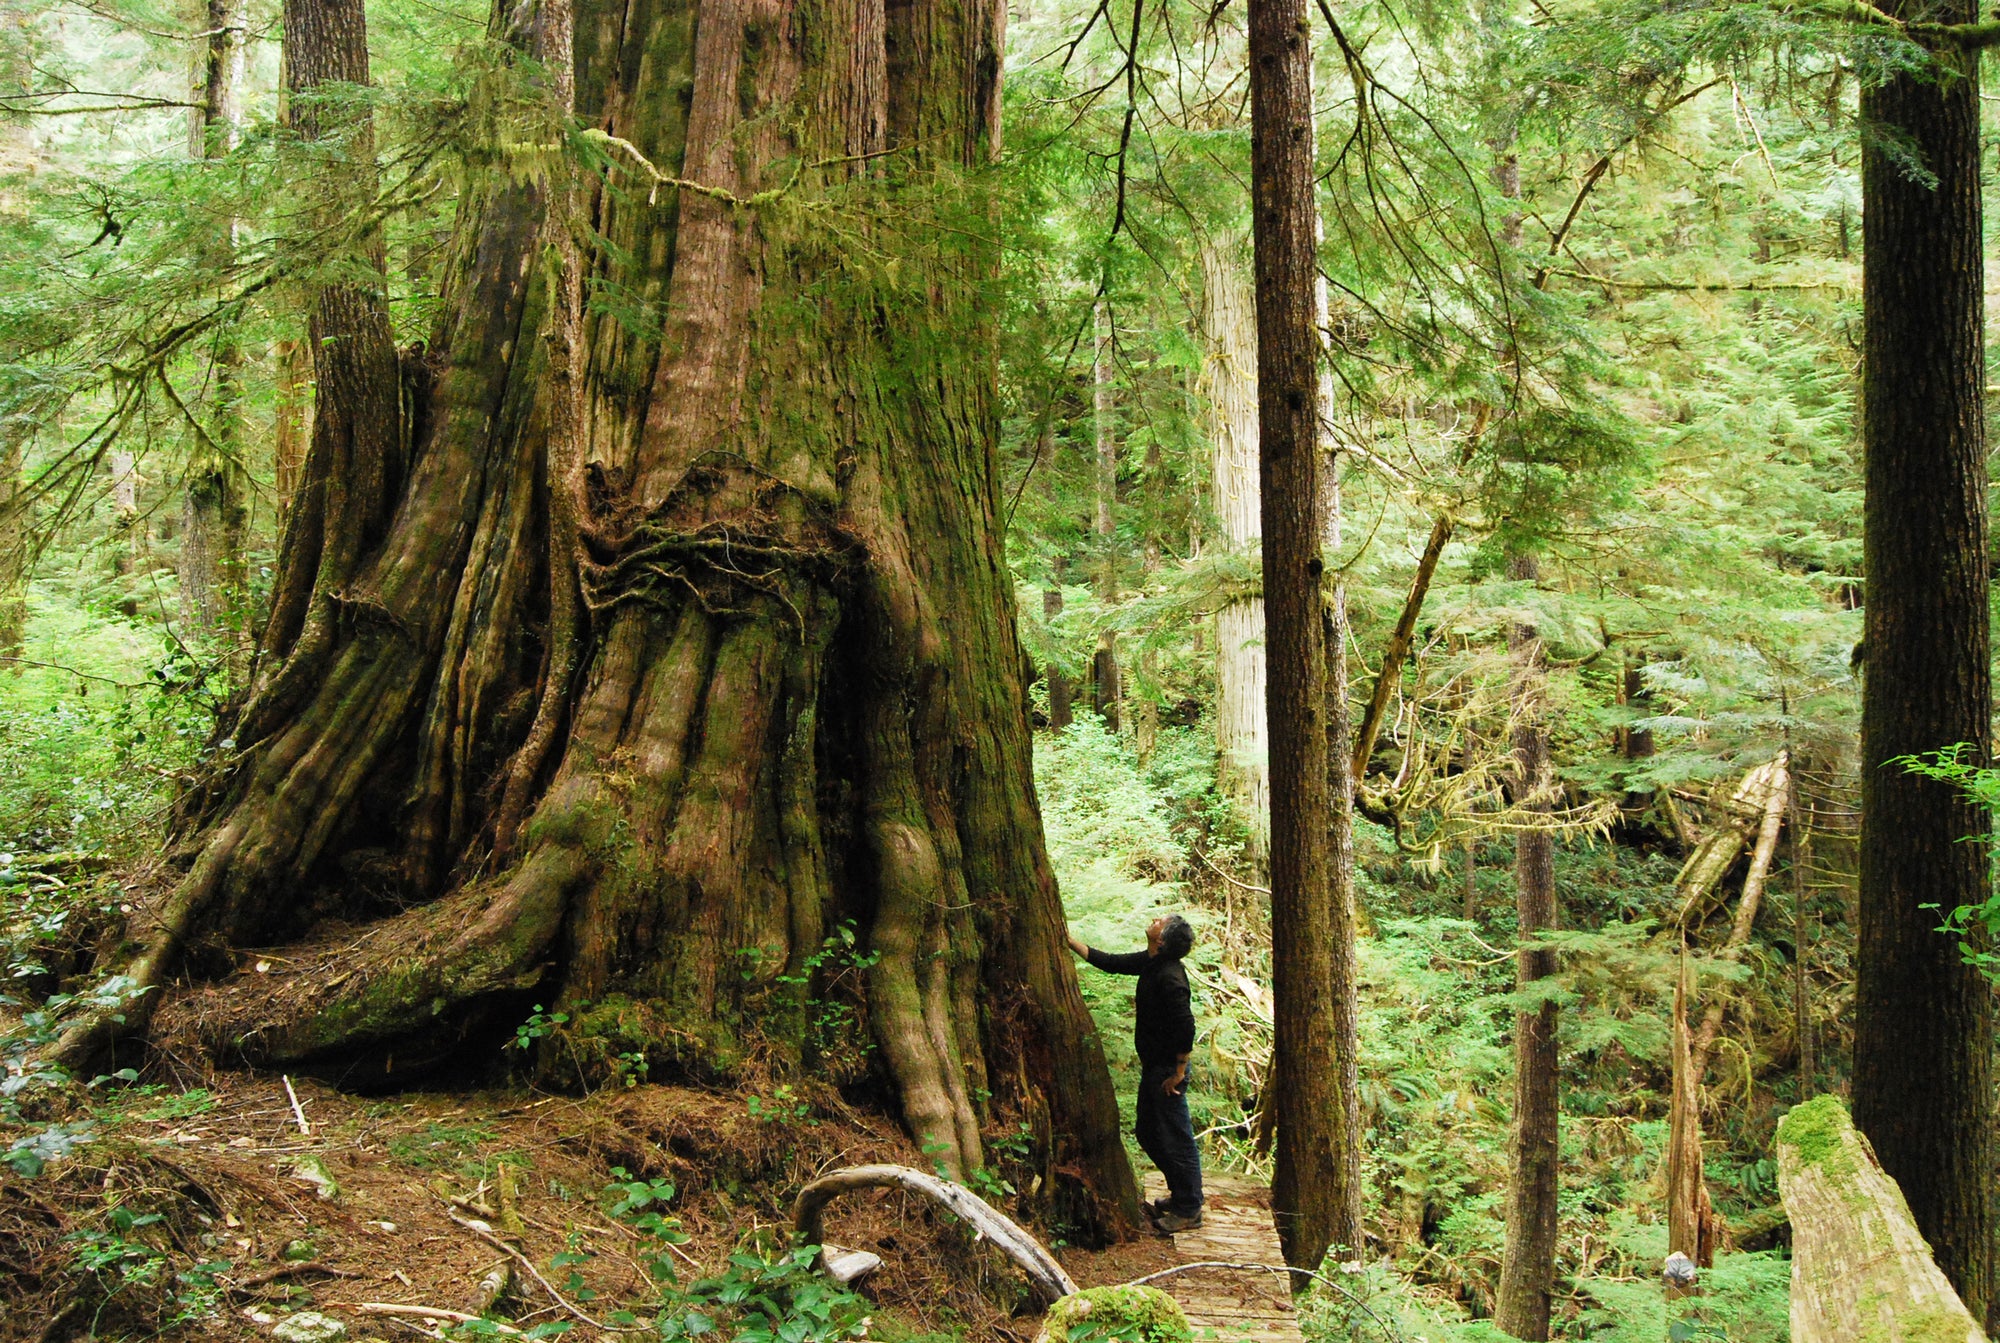 A person touching a large old-growth tree. End of image description.